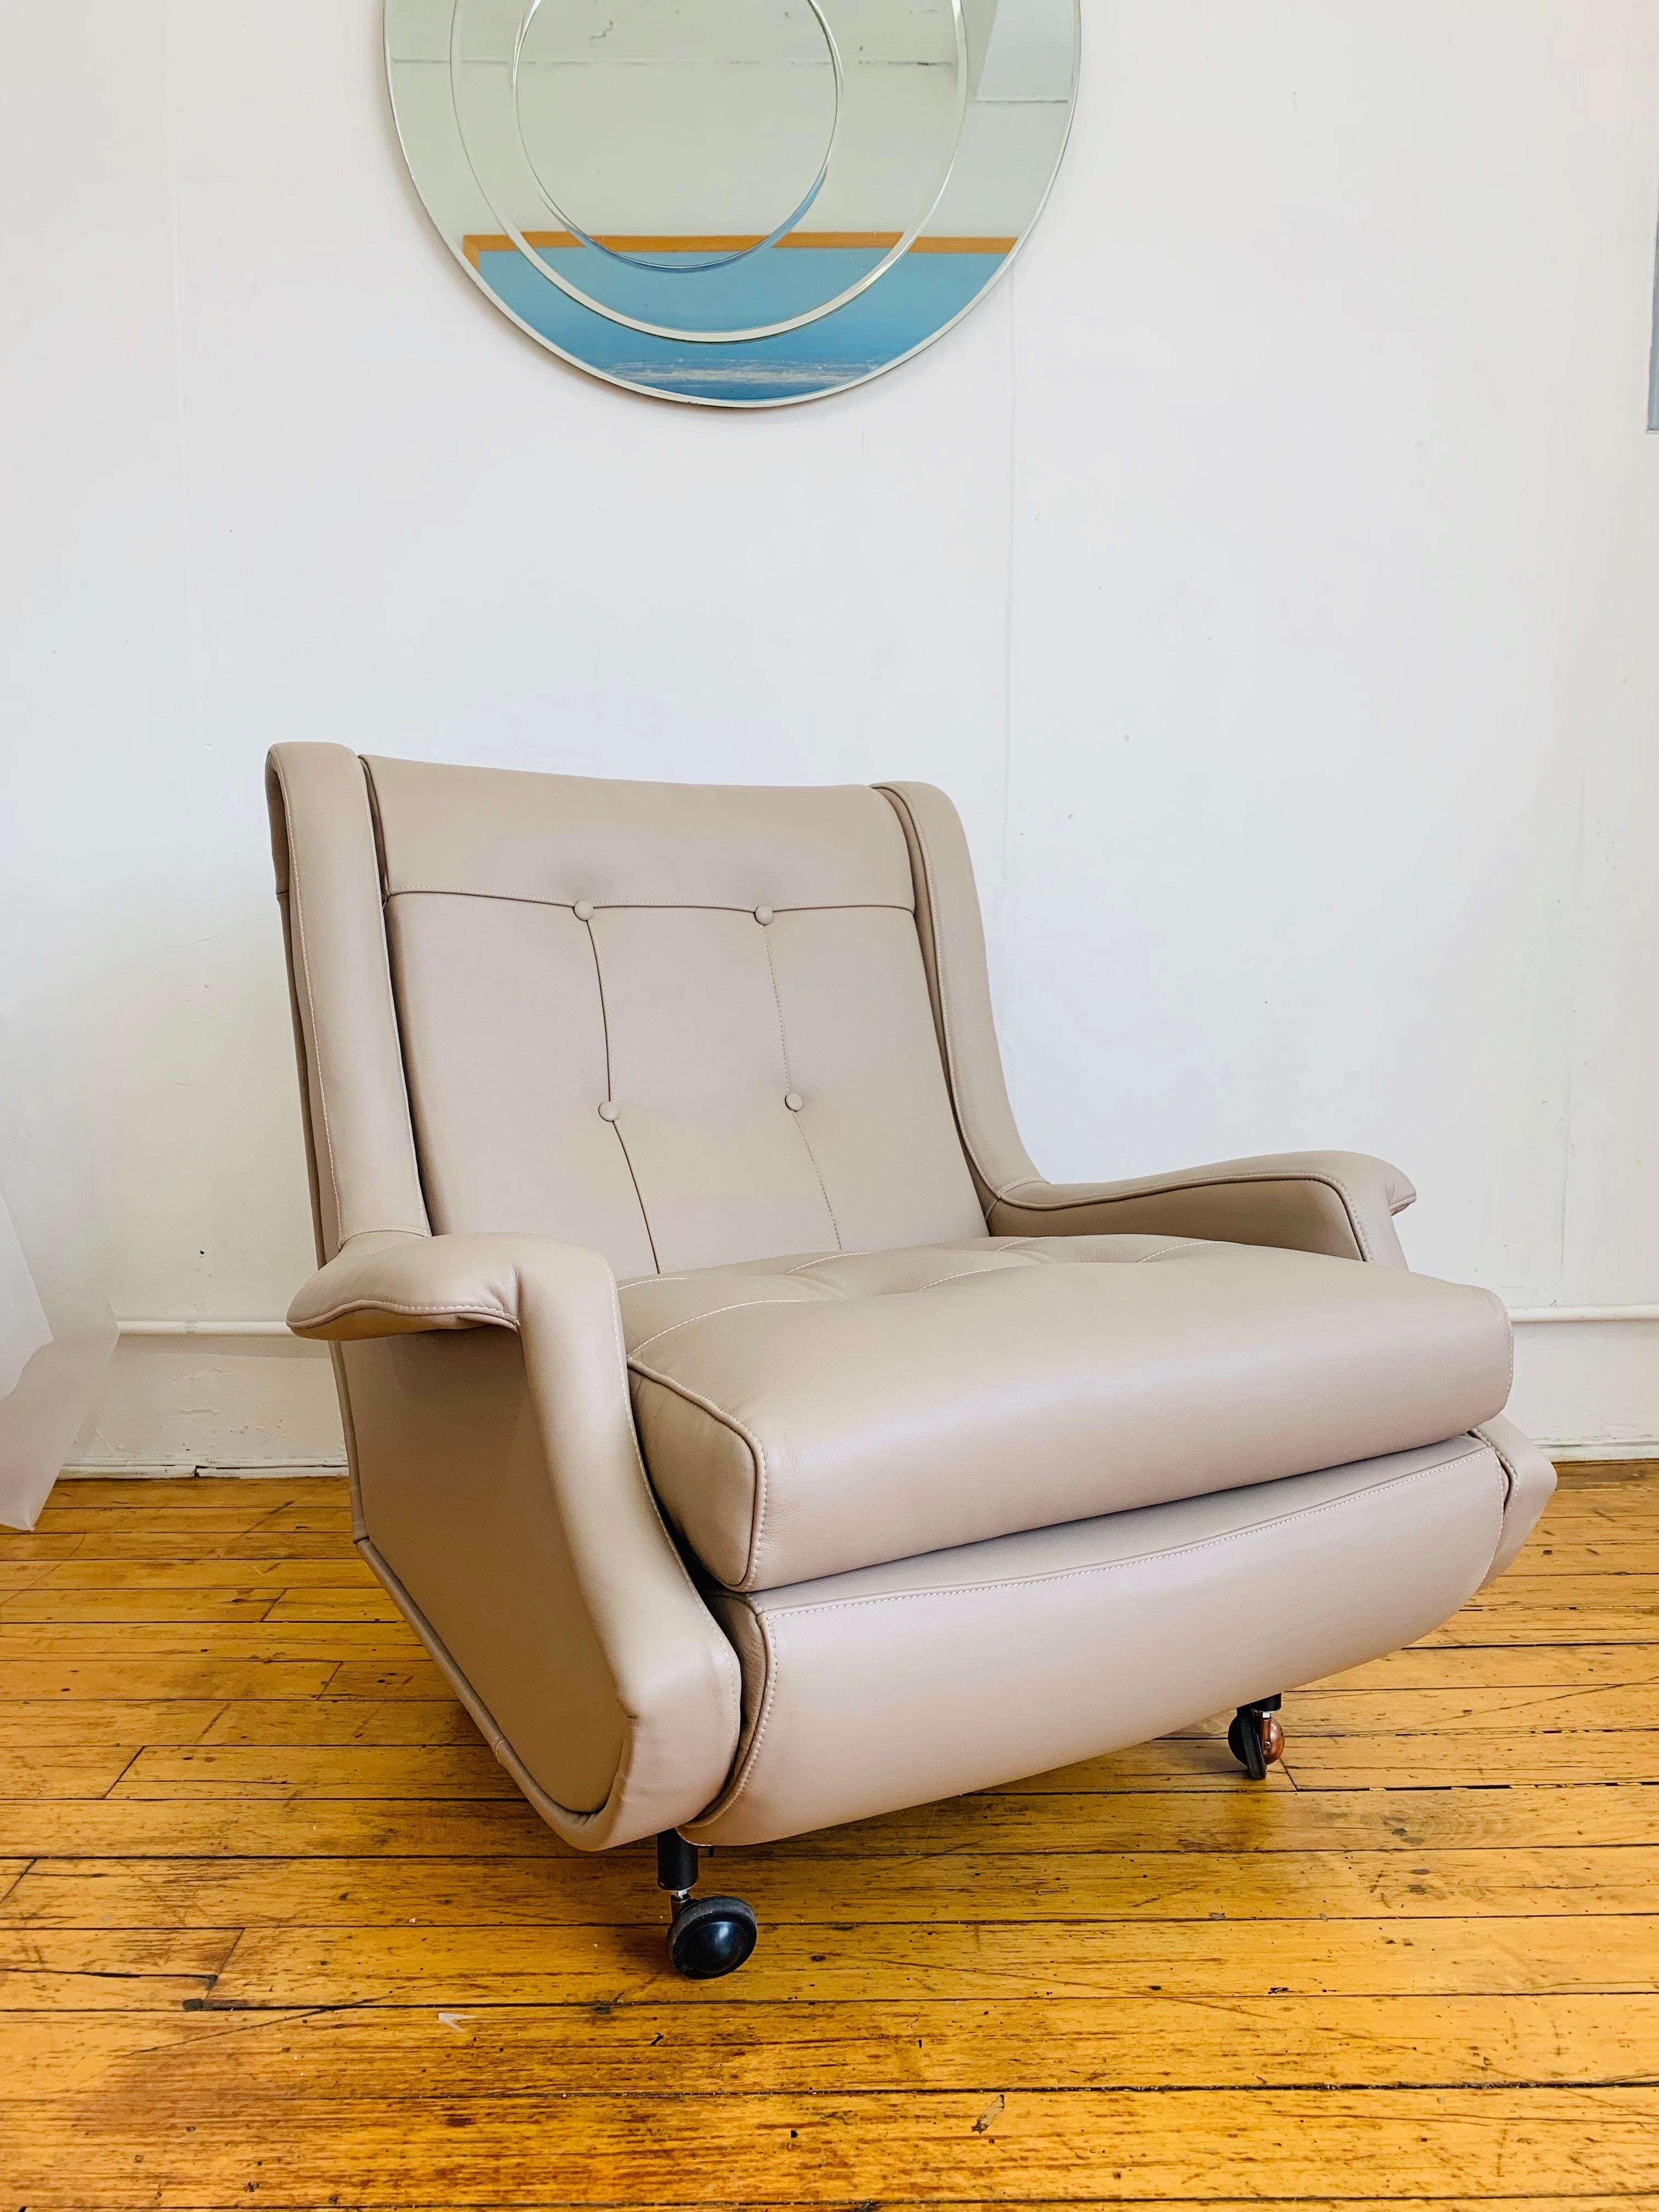 Marco Zanuso 'Regent' Lounge Chair, Arflex, Fully Restored Luxe Italian Leather In Good Condition For Sale In Jersey City, NJ